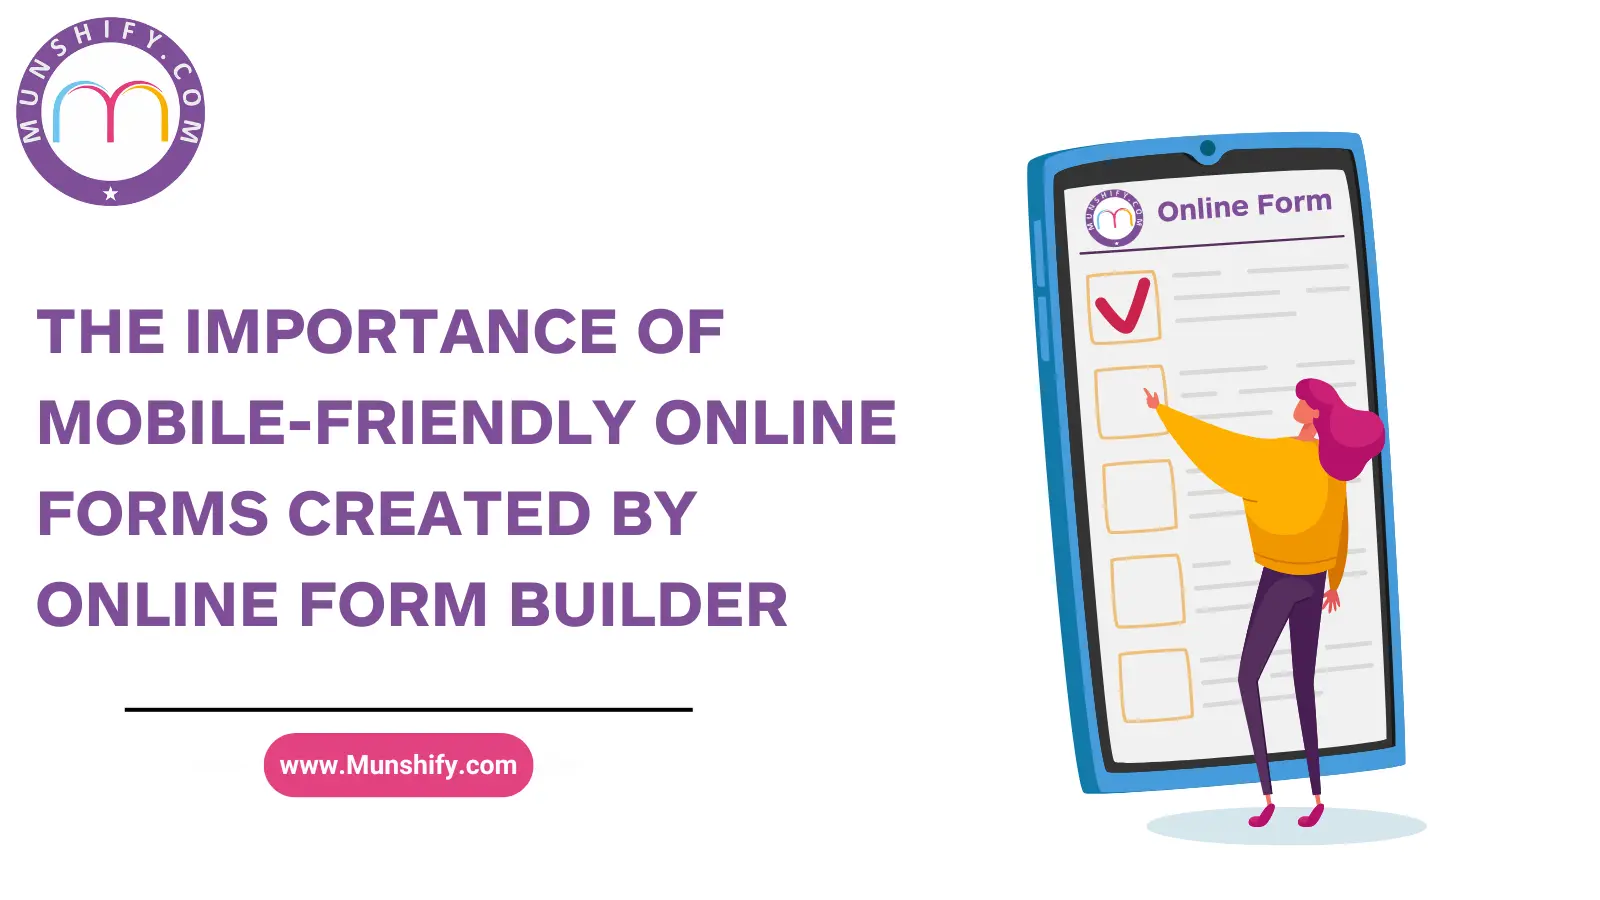 The Importance of Mobile-Friendly Online Forms Created by Online Form Builder